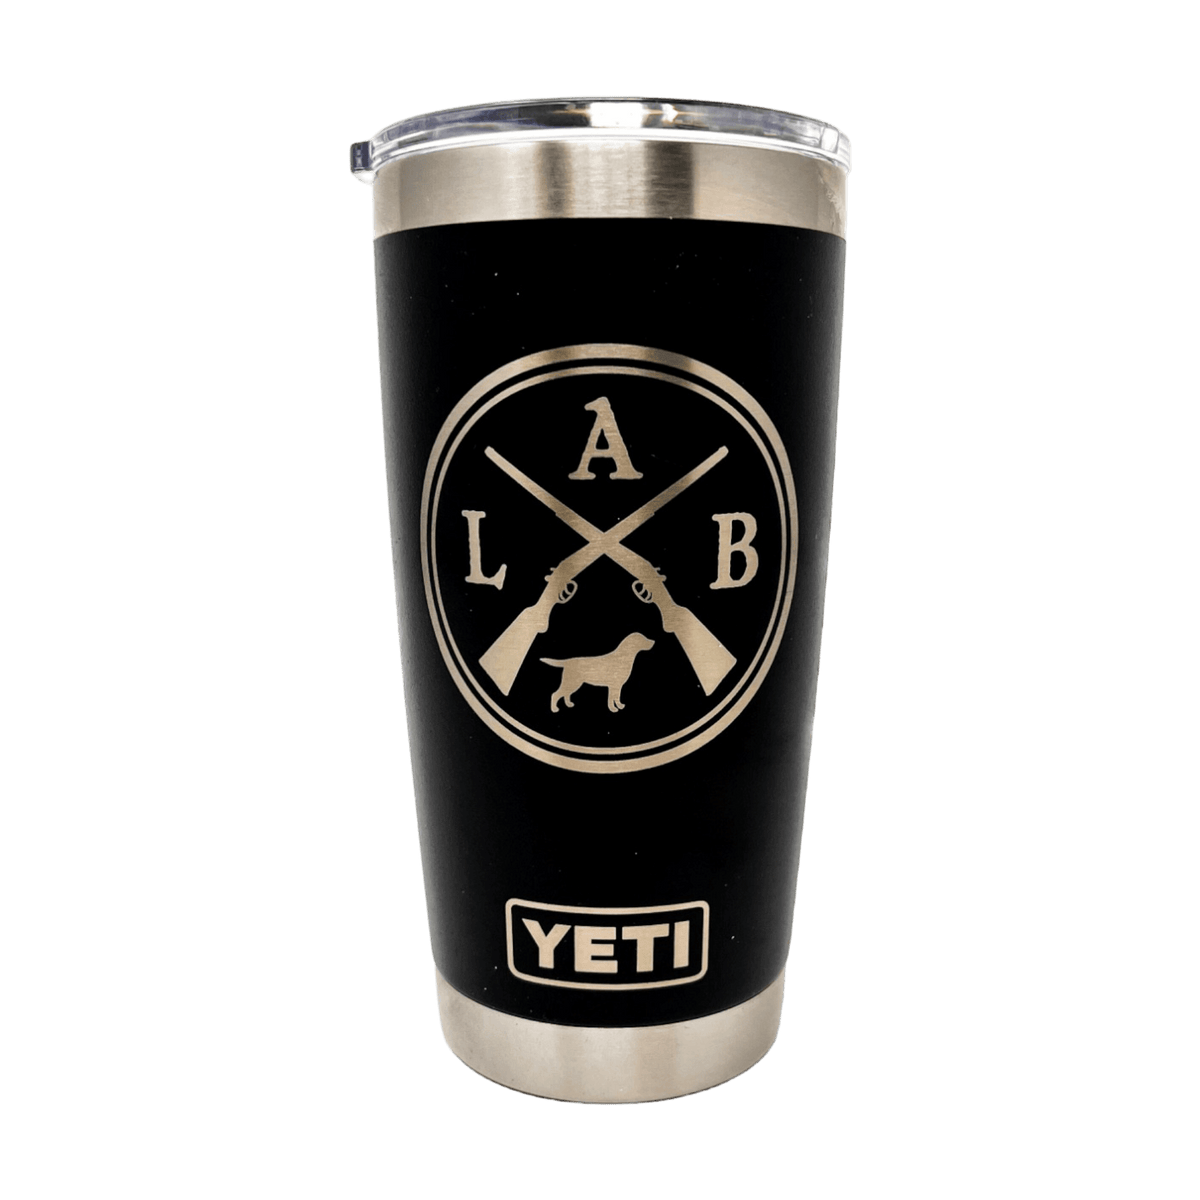 https://cdn.shopify.com/s/files/1/0606/5497/7184/products/wind-river-outpost-lab-yeti_1200x.png?v=1690330608